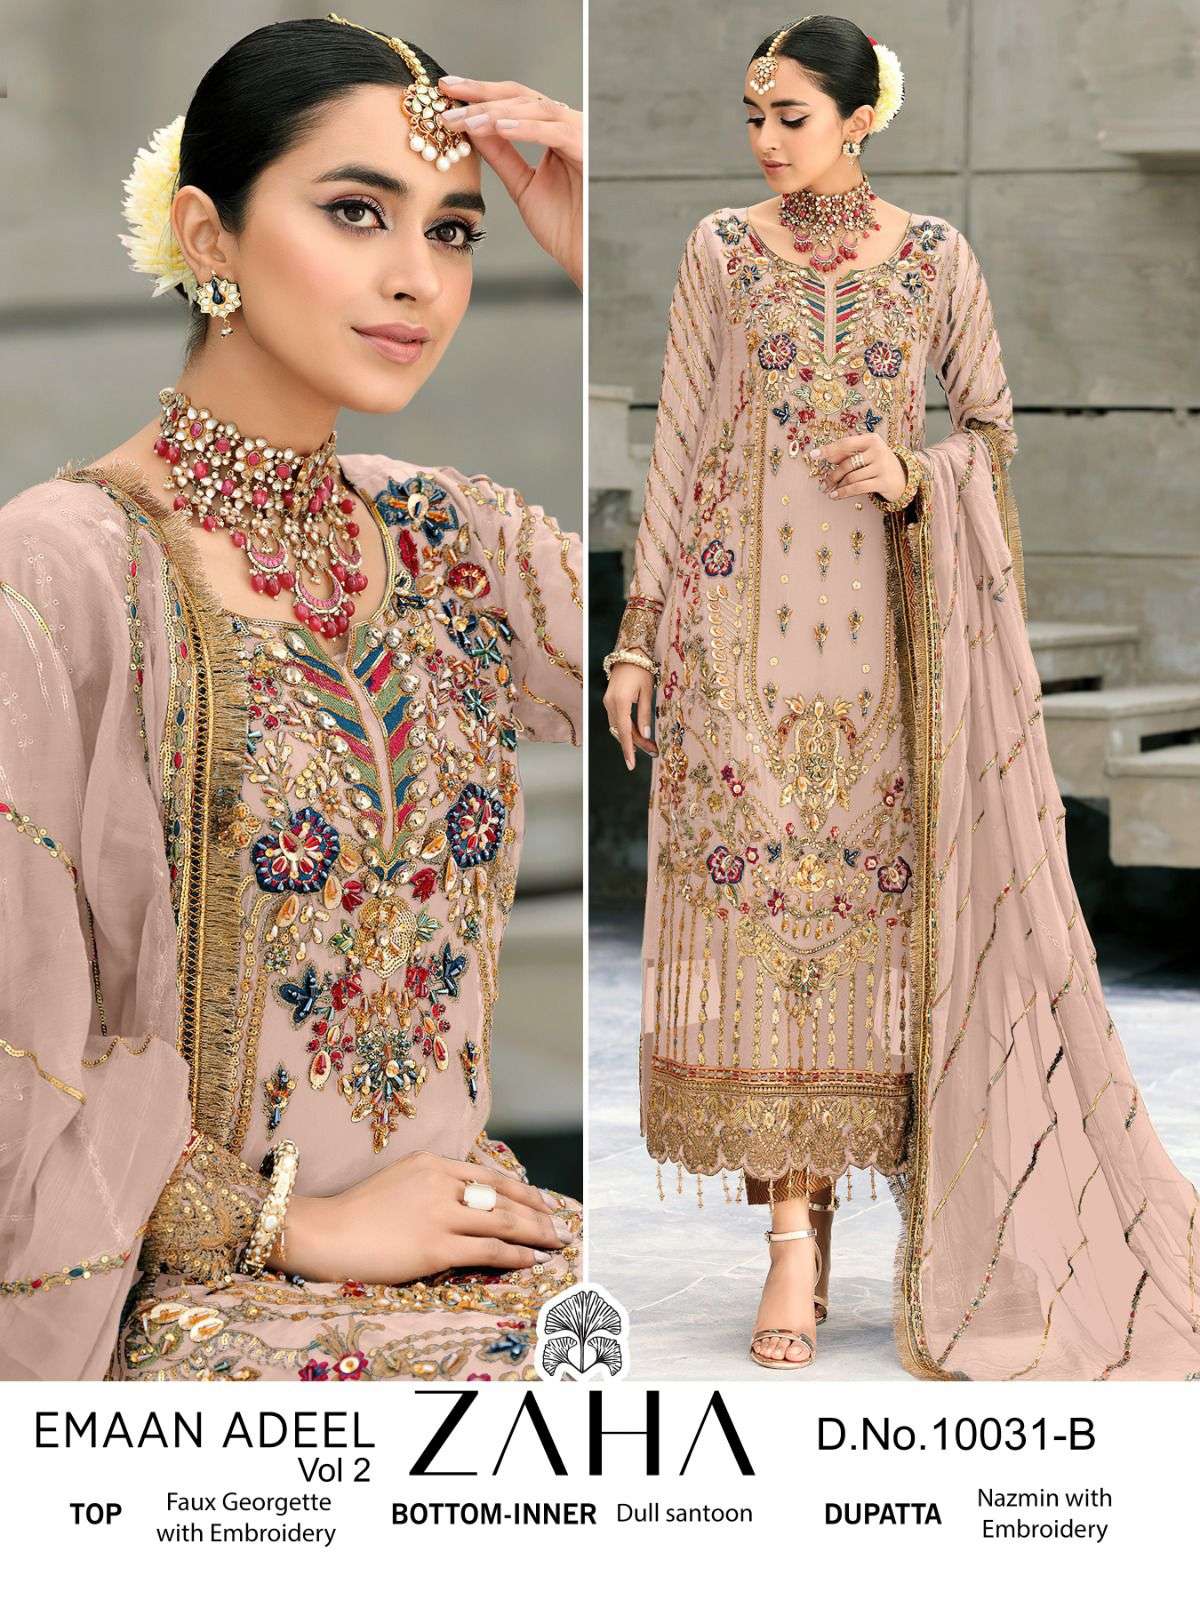 ZAHA D.NO.10031 B DESIGNER GEORGETTE WITH HEAVY EMBROIDERY WORK PAKISTANI REPLICA SUITS WHOLESALE 